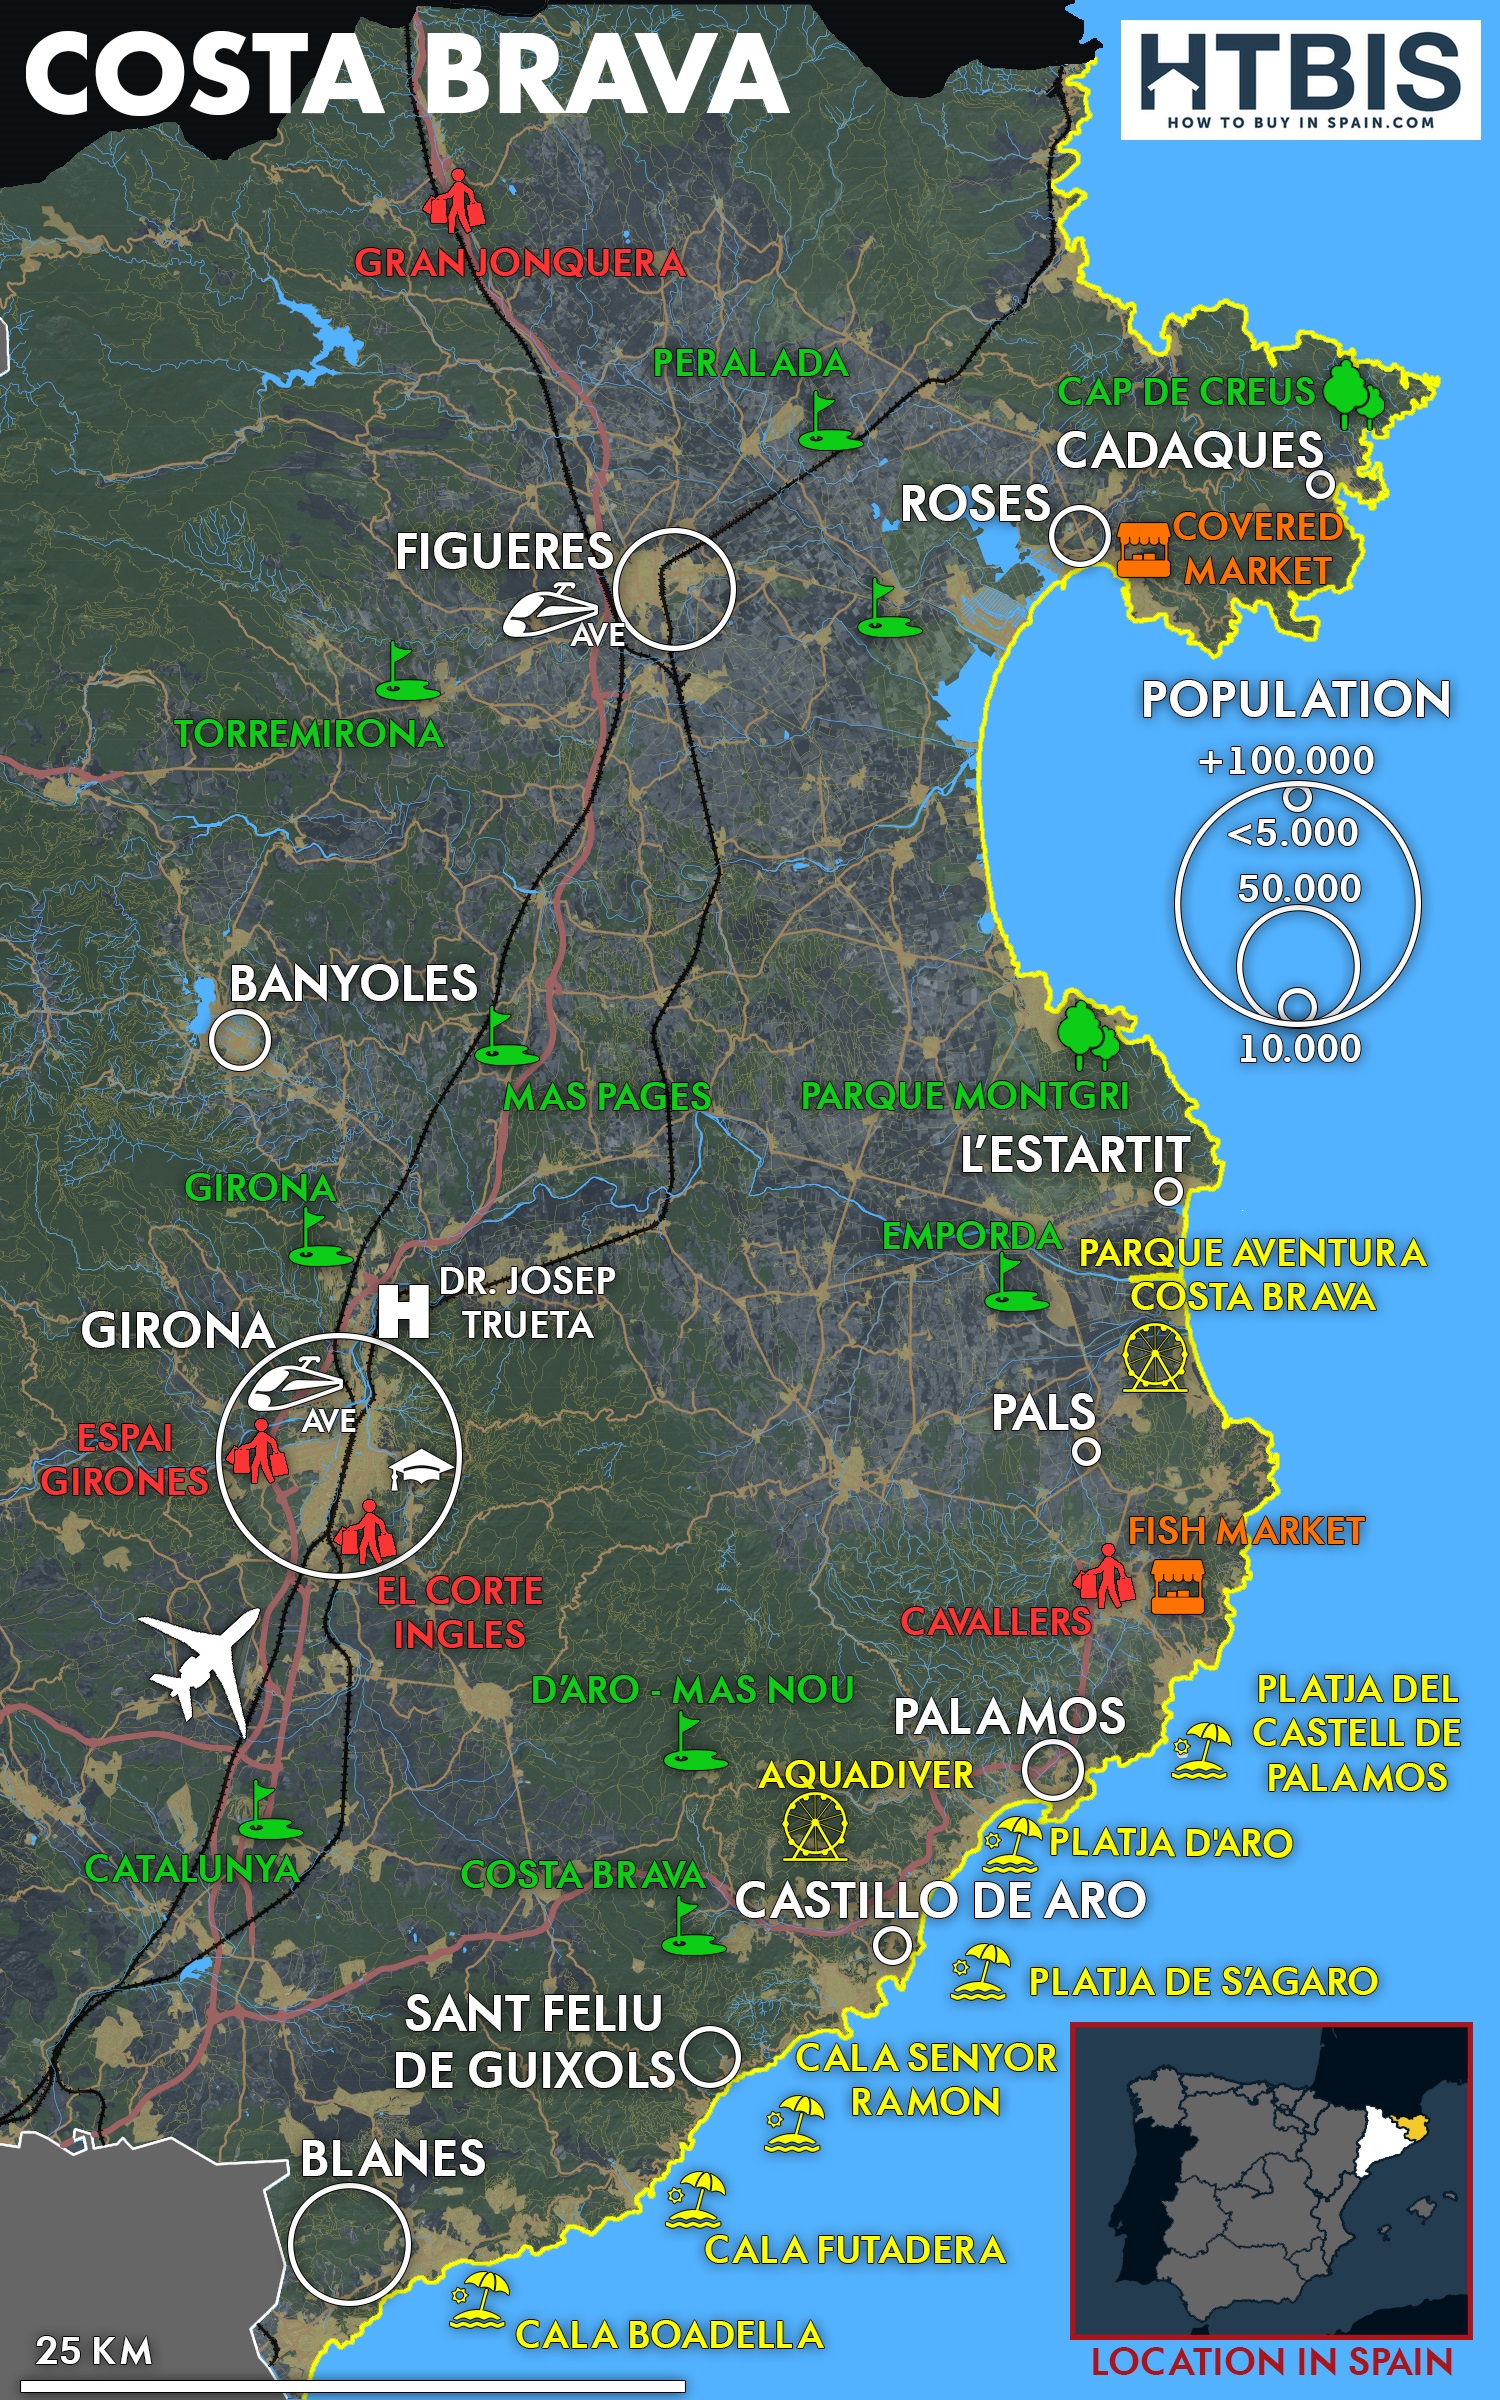 Costa brava map Infographic - How to buy in Spain